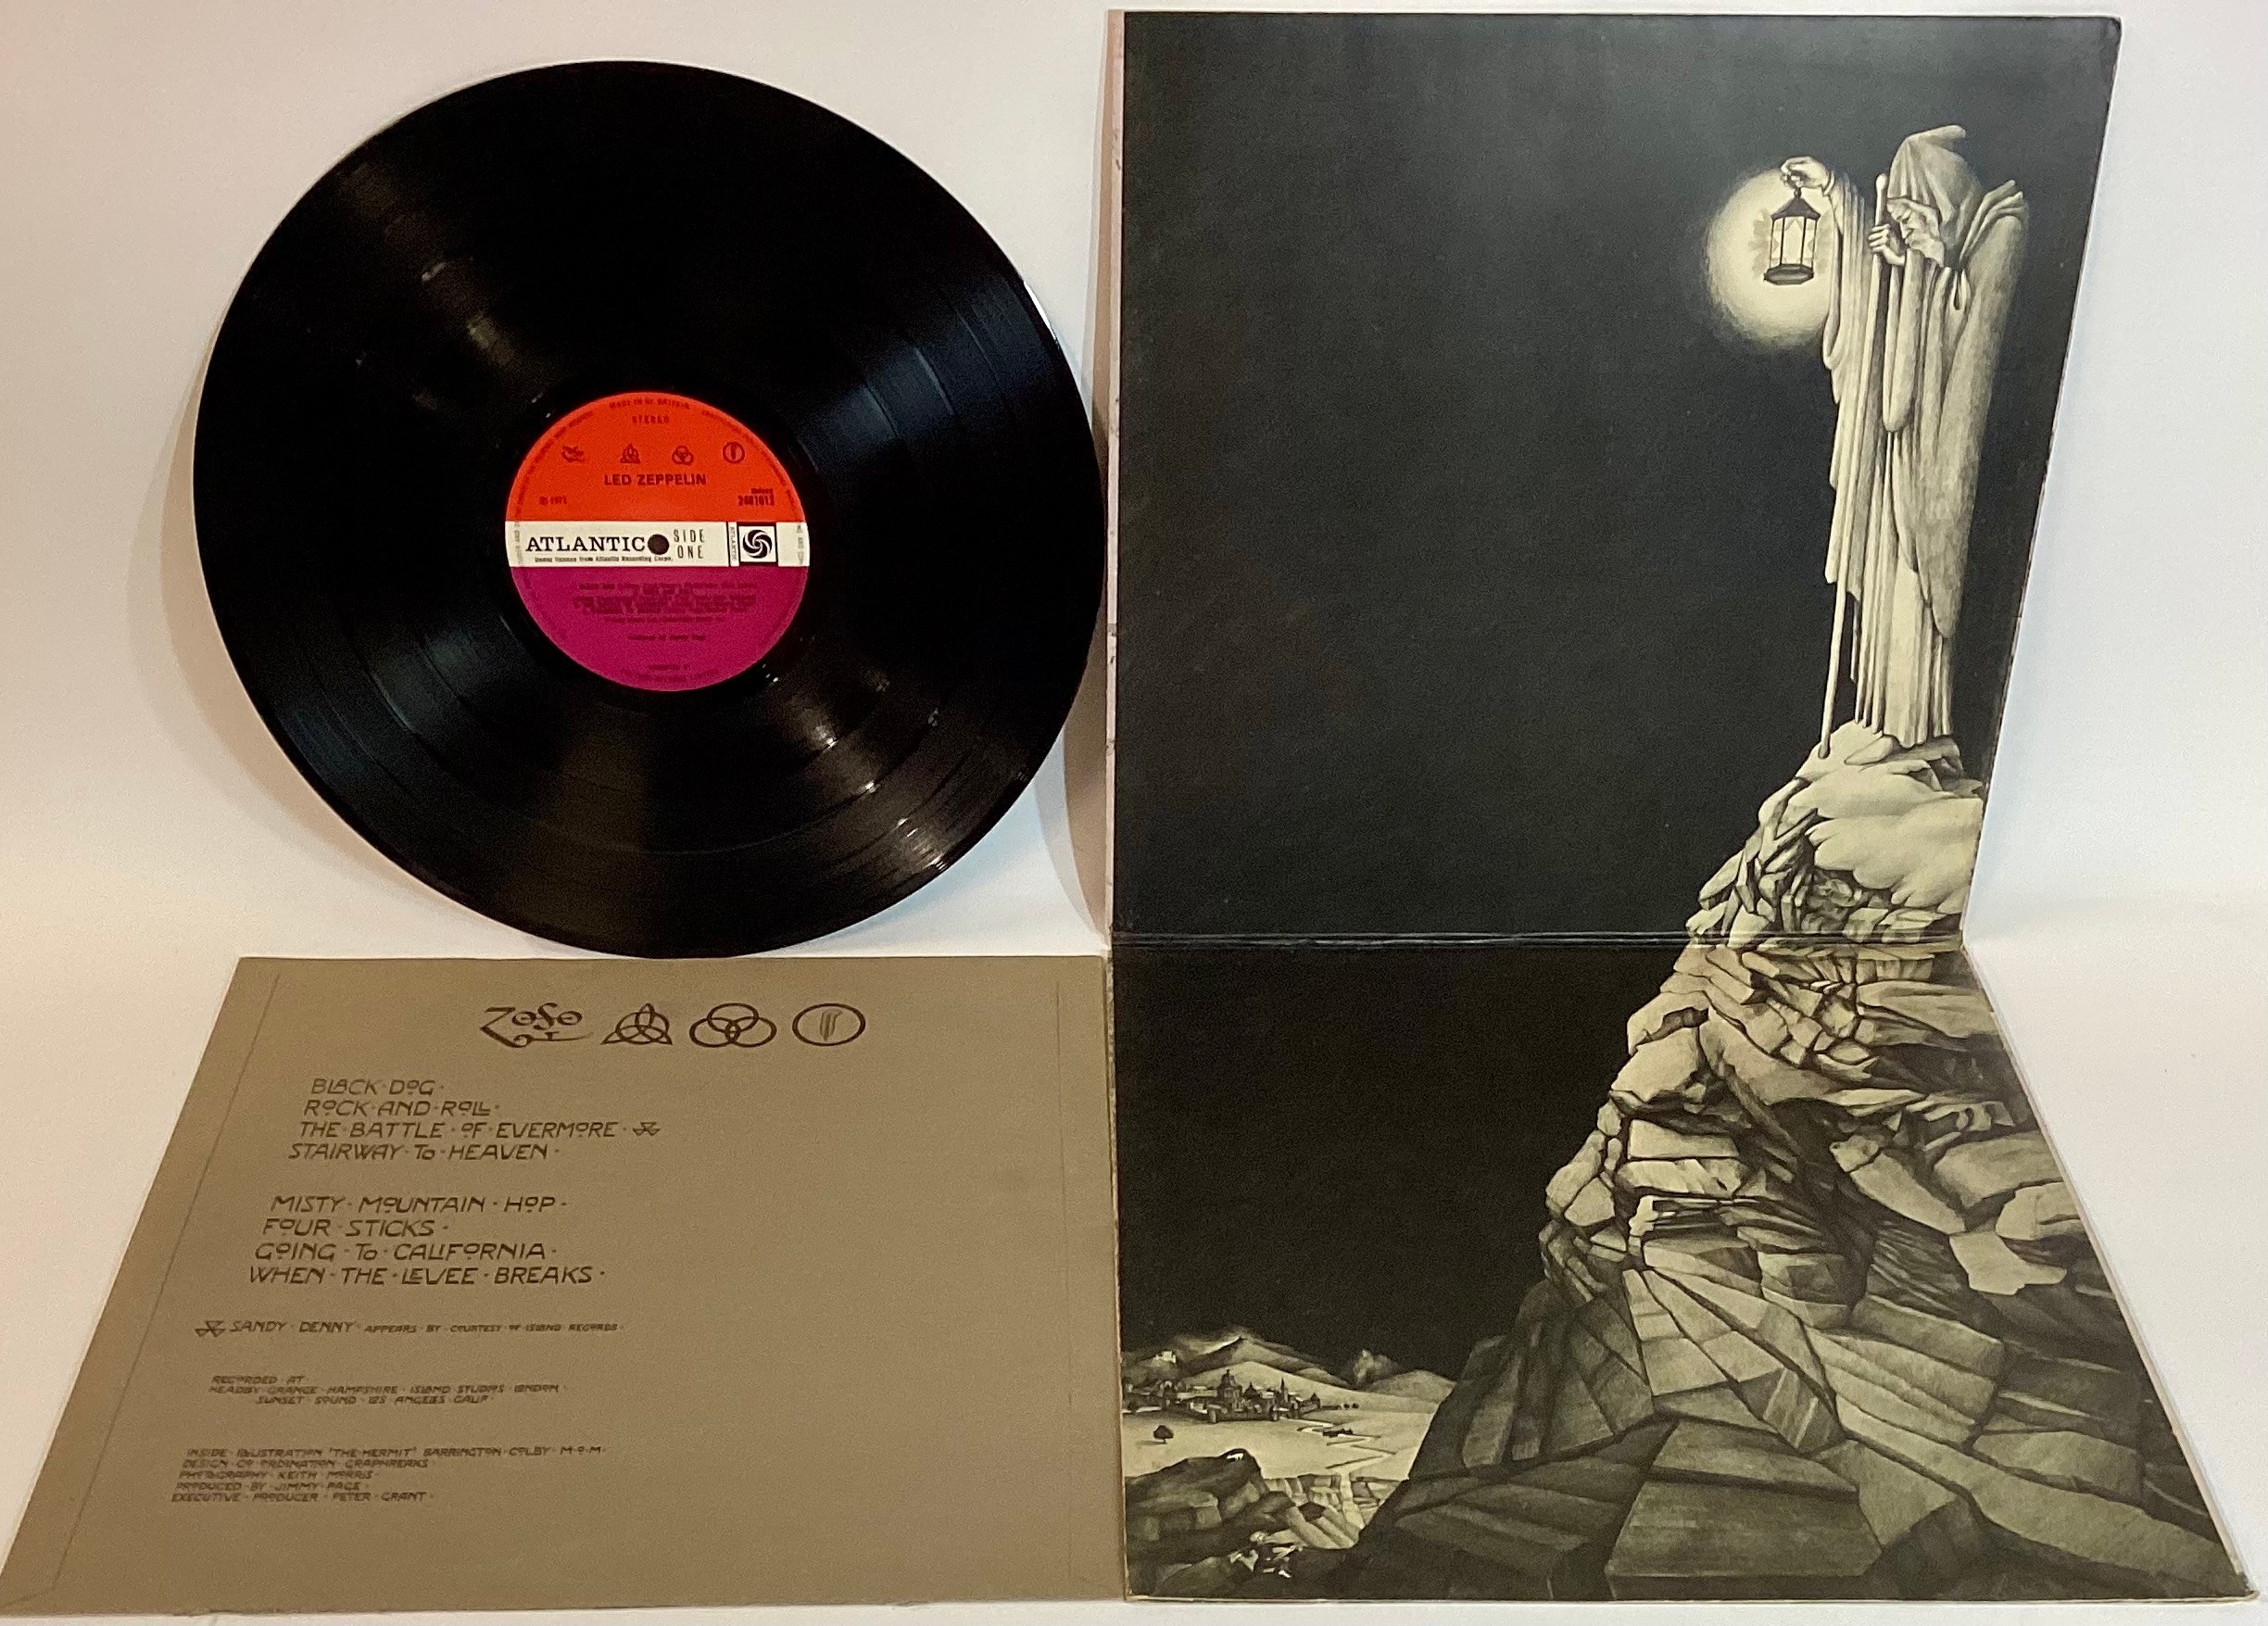 LED ZEPPELIN 1V (4) ATLANTIC RED PLUM LABEL. Rare UK 1971 Early Pressing on the Atlantic Plum and - Image 3 of 5